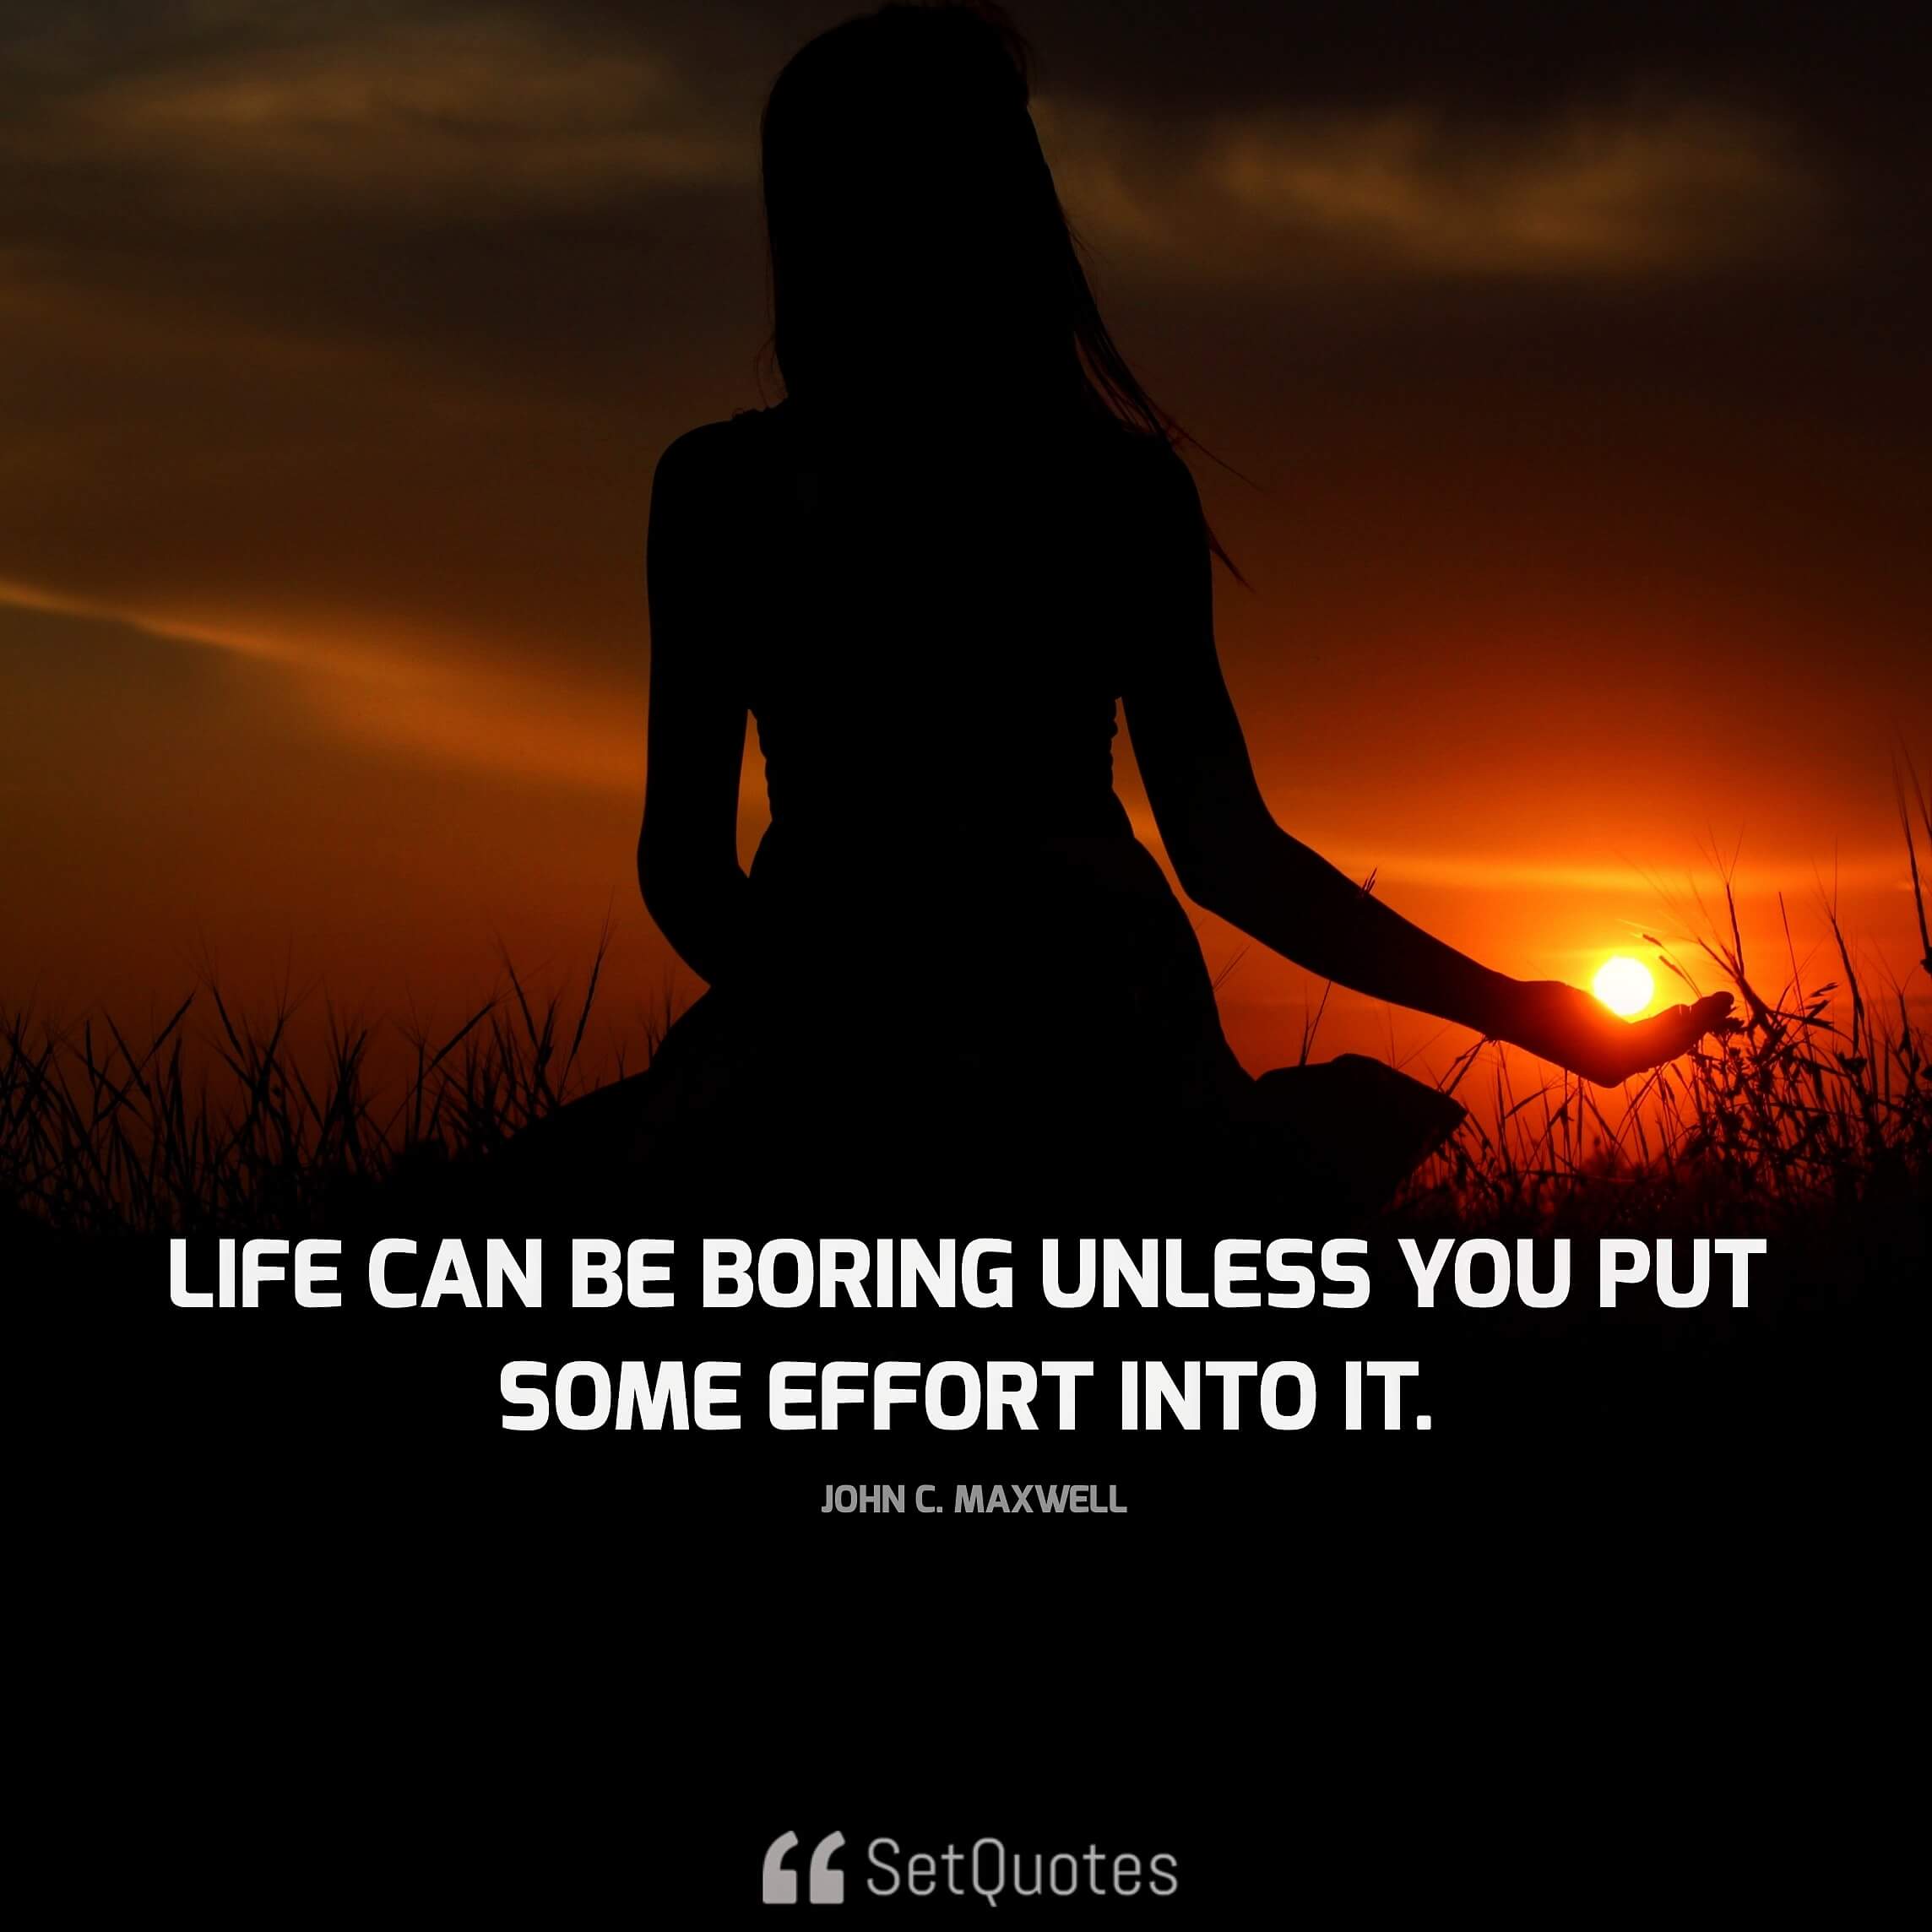 "Life can be boring unless you put some effort into it." - John C. Maxwell